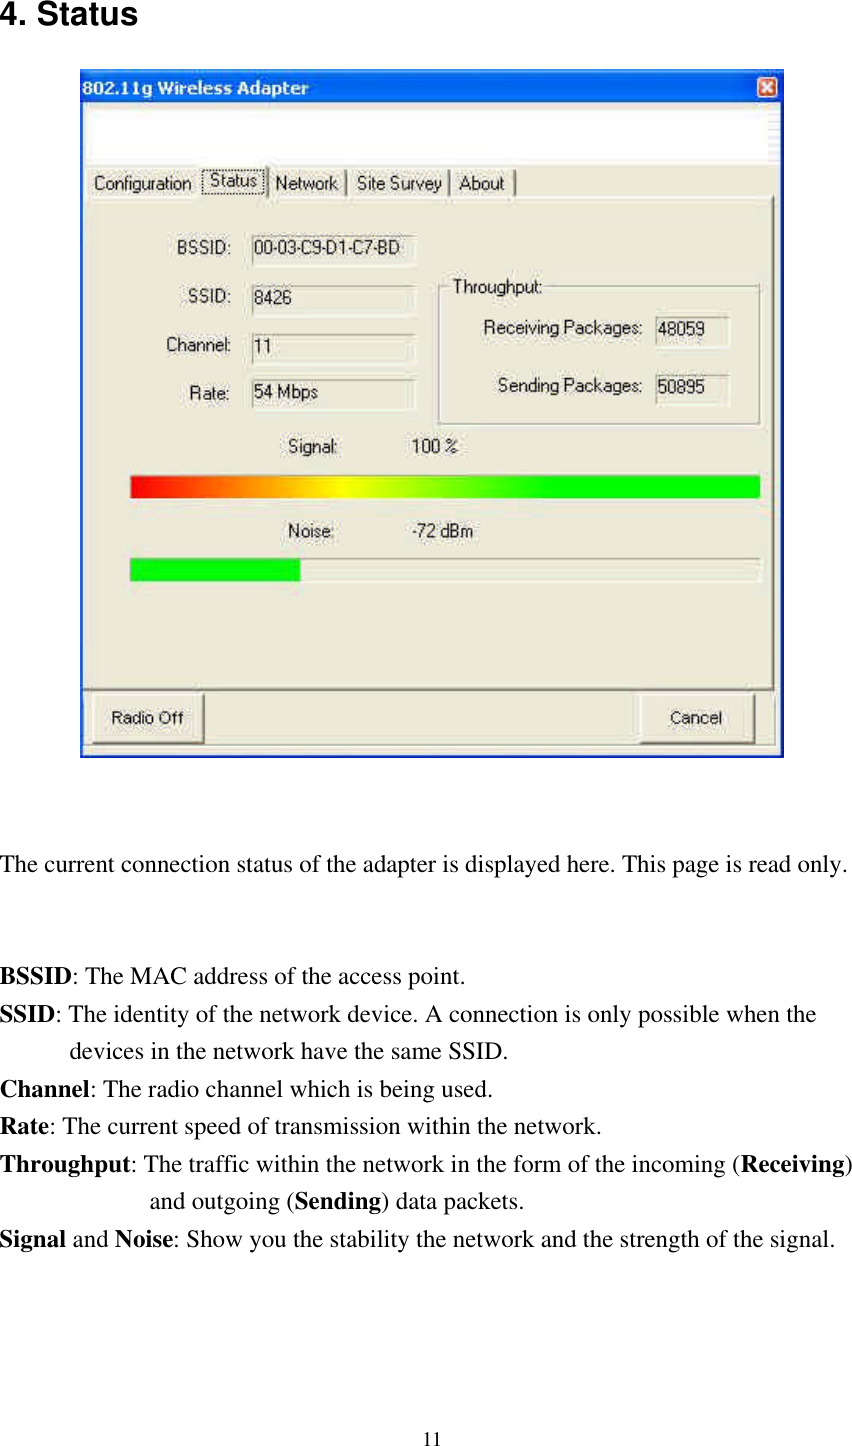 11 4. Status    The current connection status of the adapter is displayed here. This page is read only.   BSSID: The MAC address of the access point. SSID: The identity of the network device. A connection is only possible when the         devices in the network have the same SSID. Channel: The radio channel which is being used. Rate: The current speed of transmission within the network. Throughput: The traffic within the network in the form of the incoming (Receiving)                 and outgoing (Sending) data packets. Signal and Noise: Show you the stability the network and the strength of the signal.    